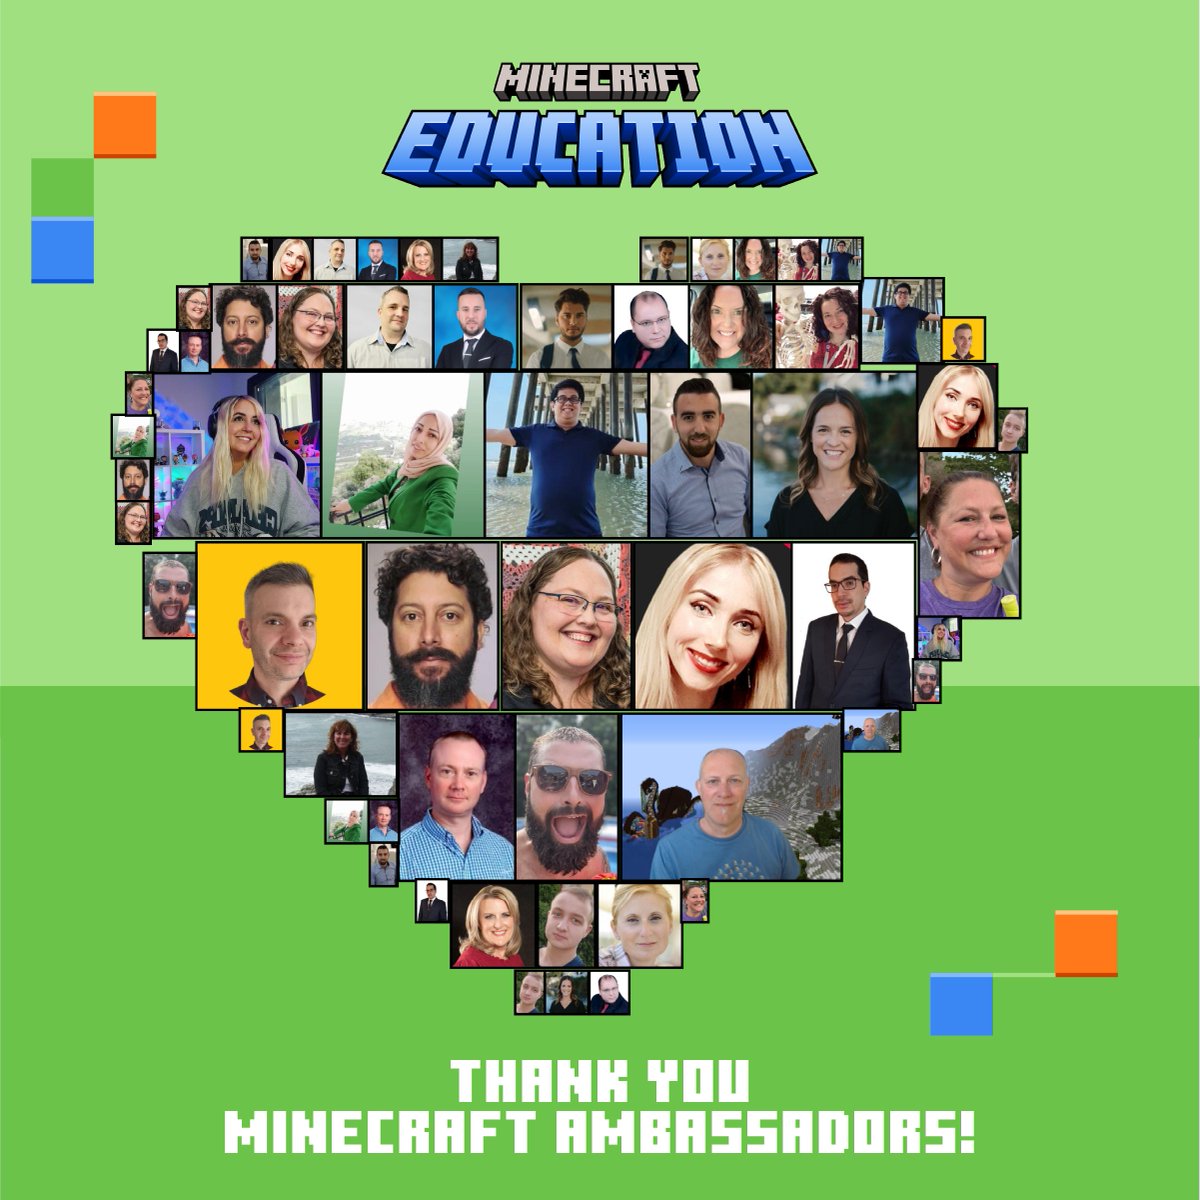 This #TeacherAppreciationWeek we’d love to give an Ender-normous shout-out to our amazing Ambassador Community! We appreciate all you’re doing to support #MinecraftEdu educators around the world. Learn more about our ambassador program: aka.ms/MCE_Ambassadors #ThankATeacher